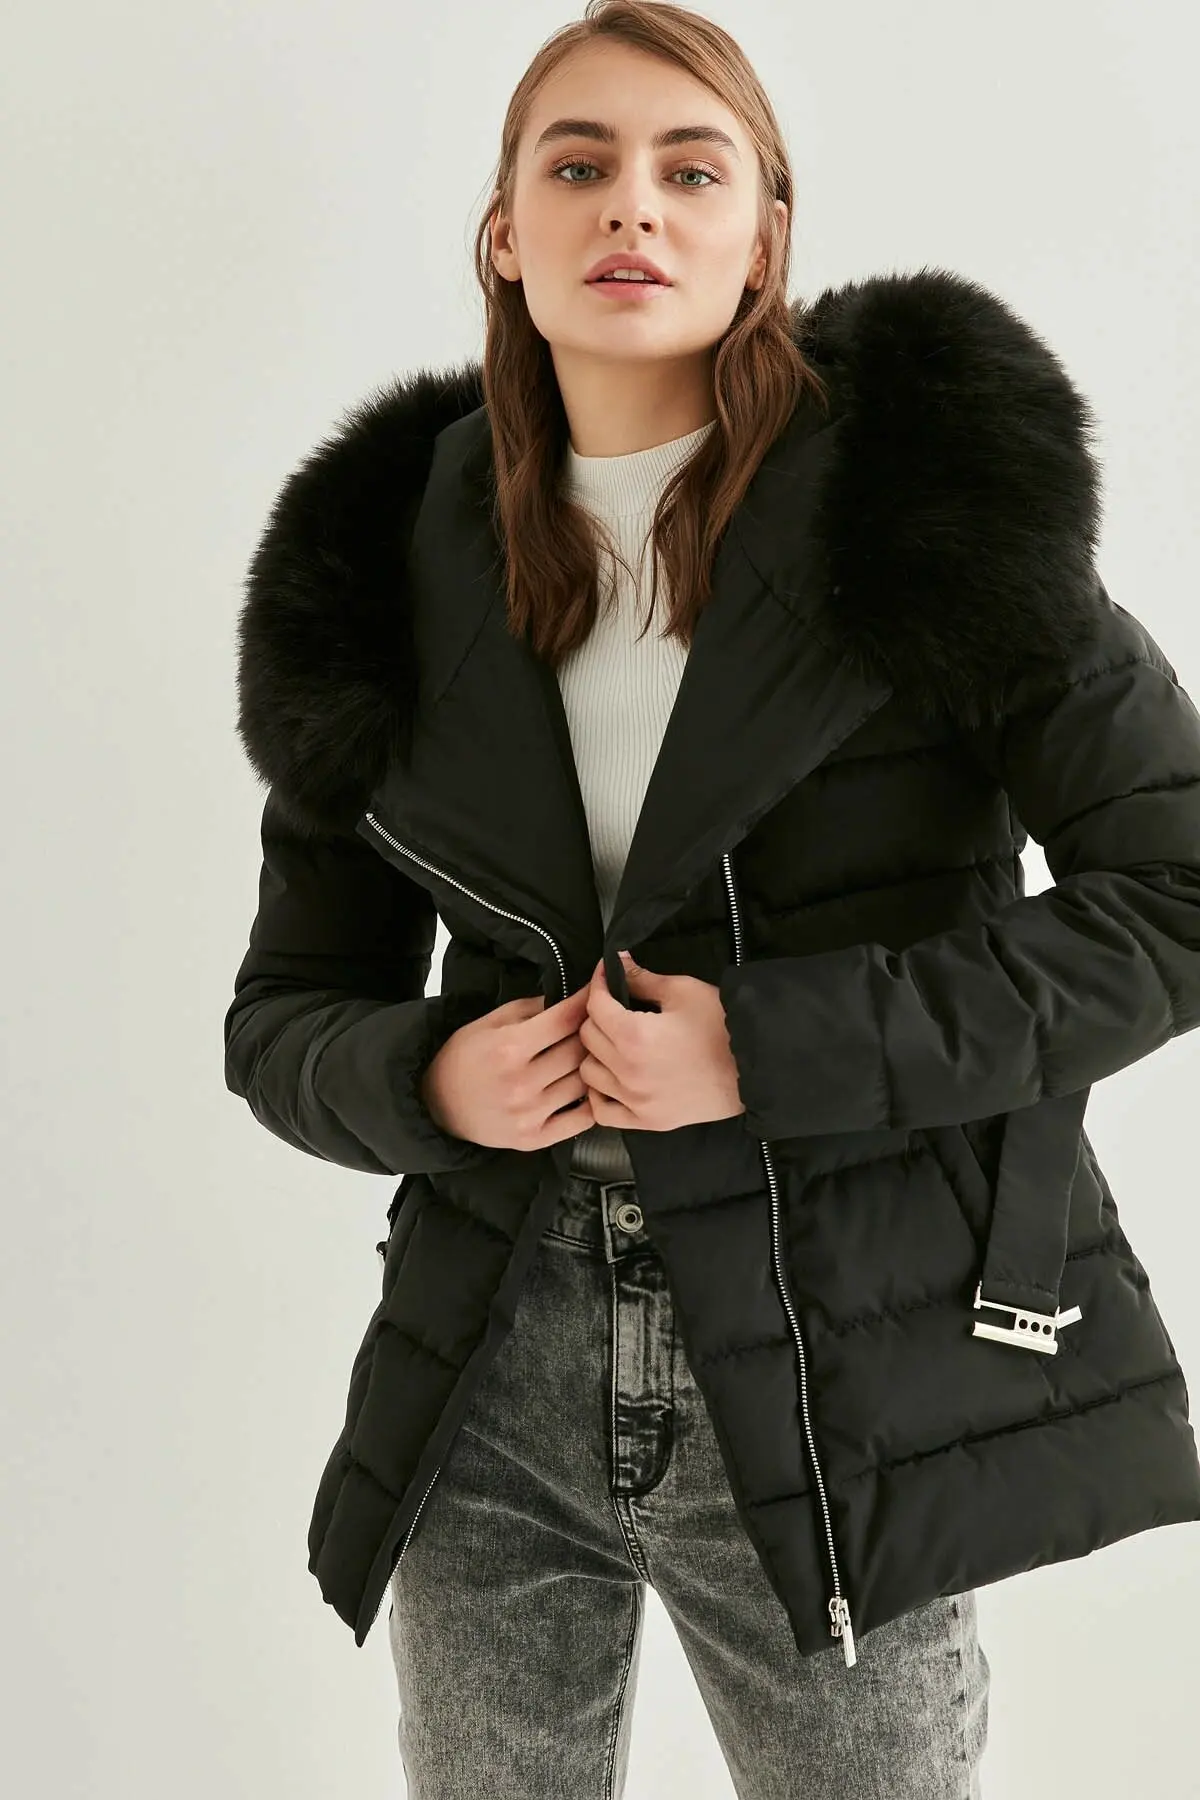 Women Double Breasted Coats Inflatable Padded Jackets Fur Coat Long Coat With Hat Winter Wear Cold Proof New Street Fashion